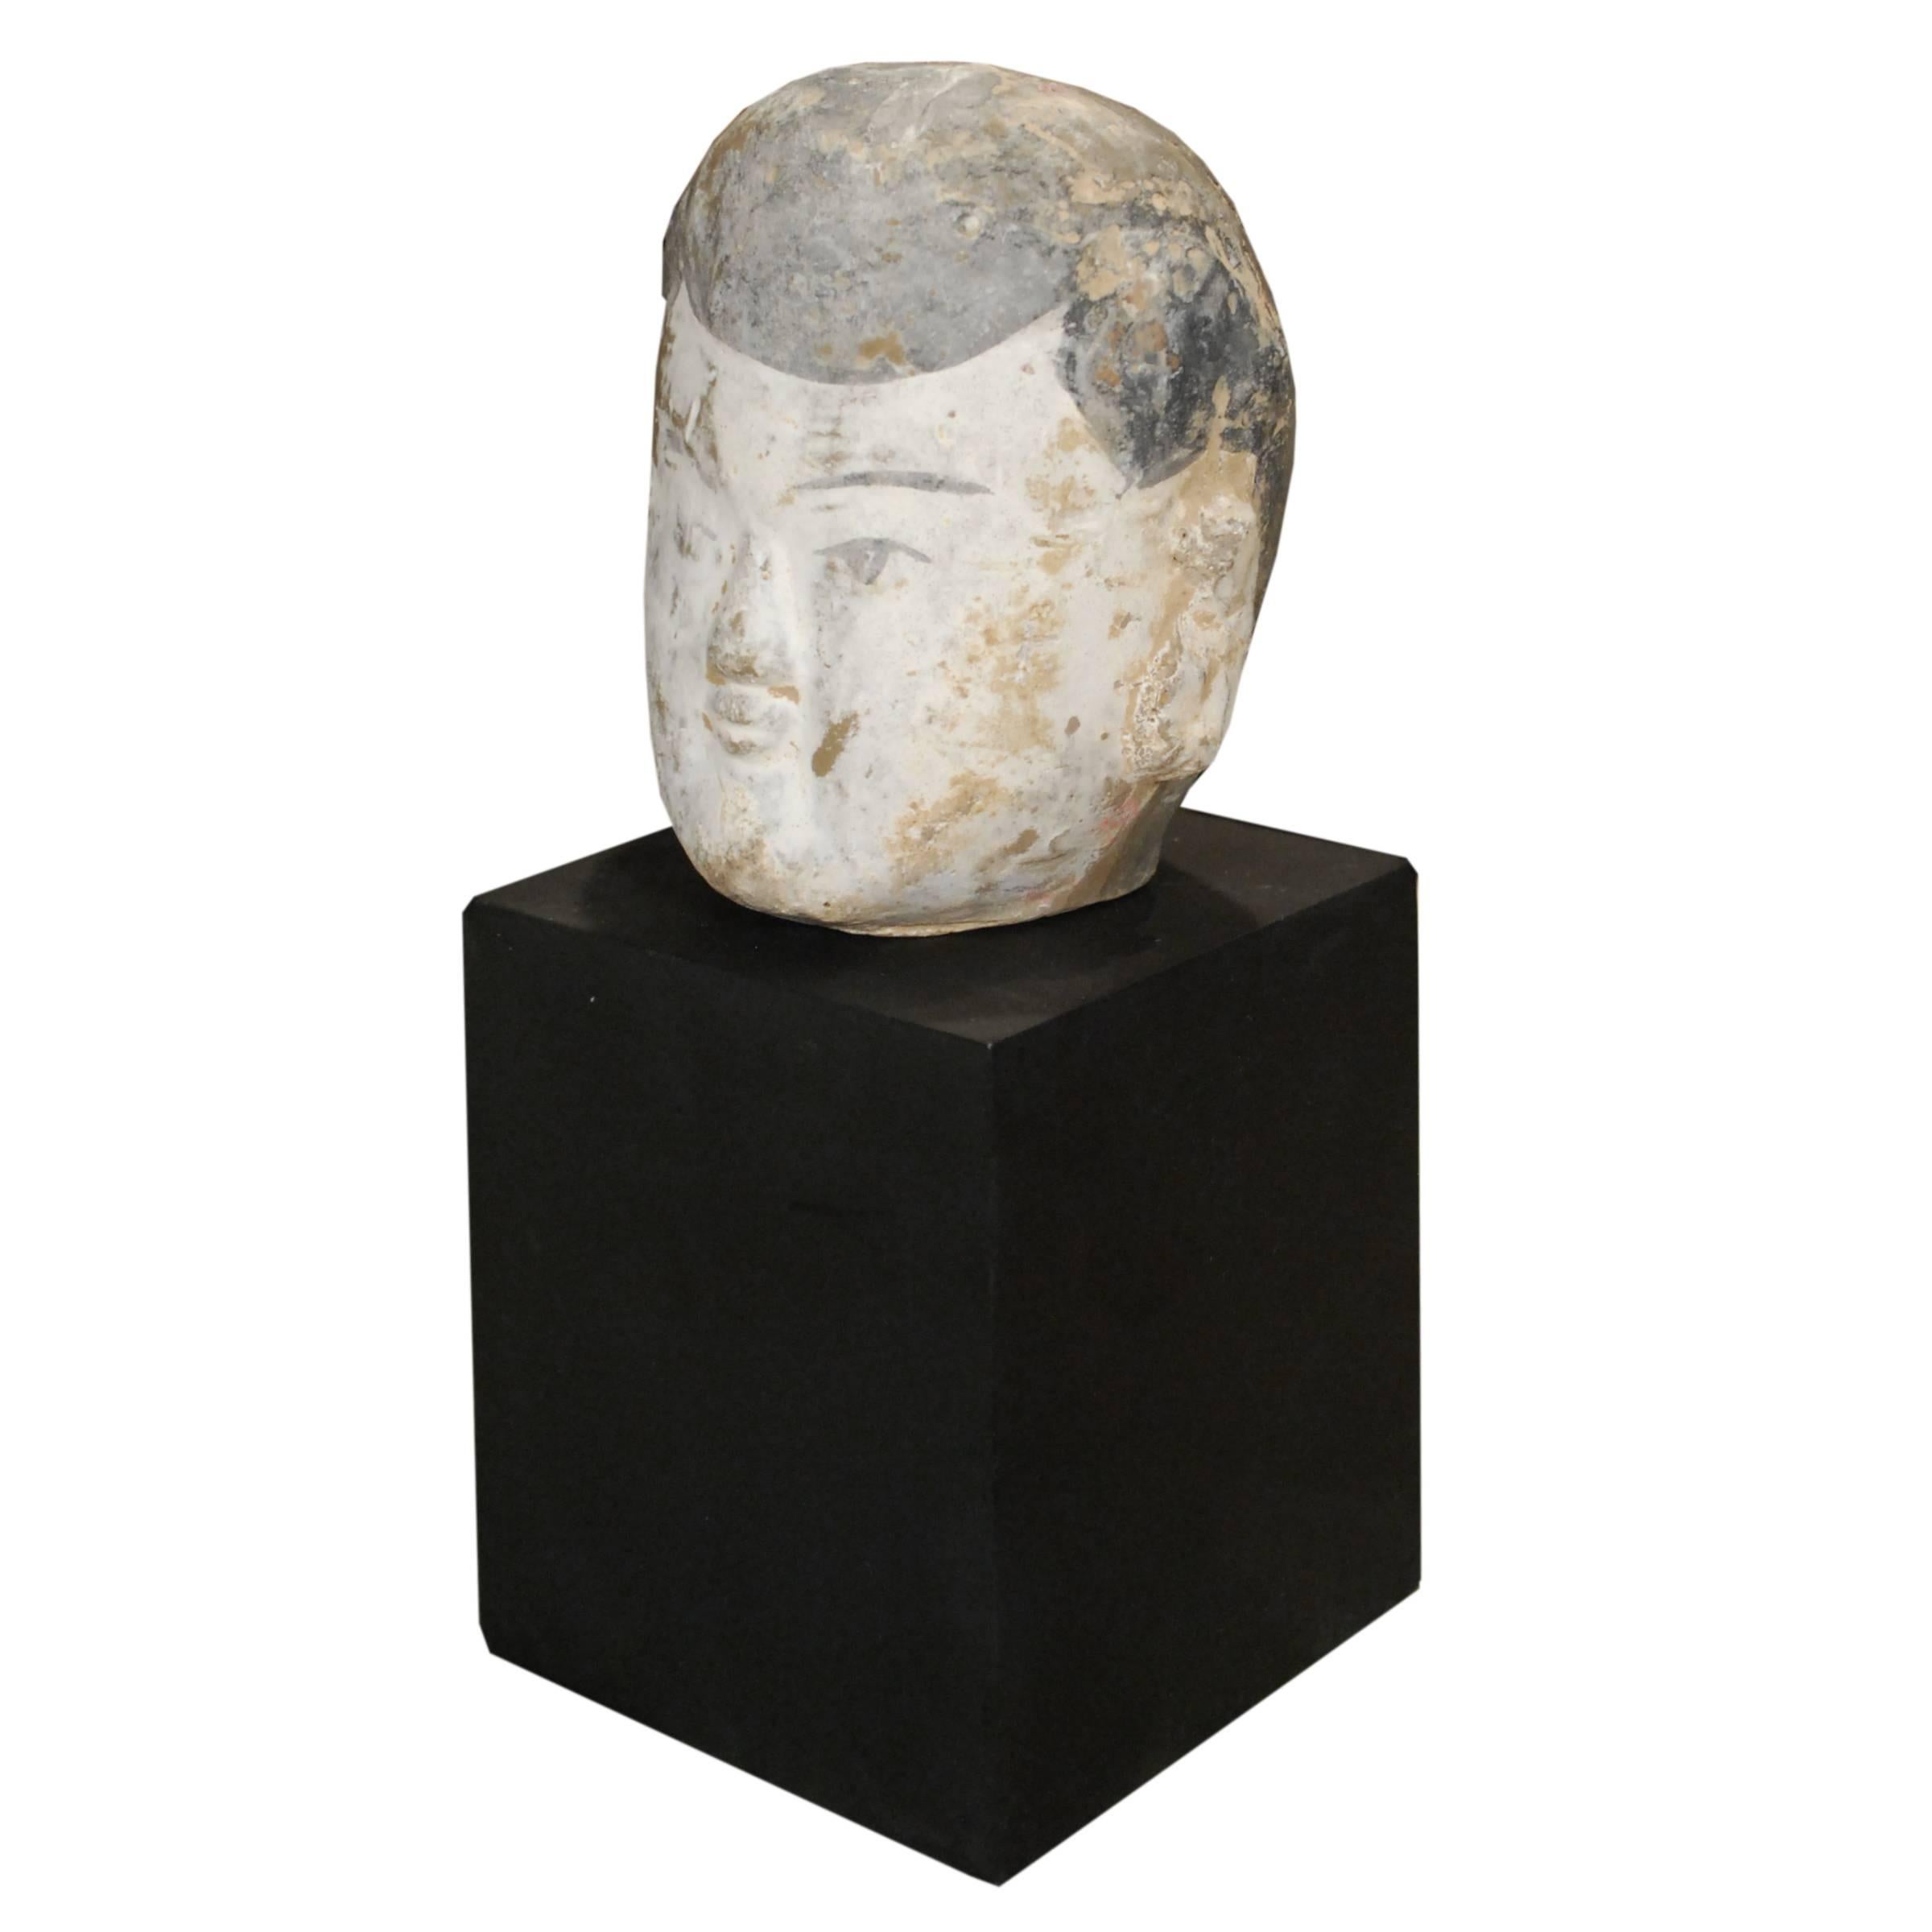 With serene countenance, this sculptural head of a celestial being bears the influence of Tang-dynasty sculpture. Sculptors of this era downplayed pronounced modeling of human features, choosing to create broad shapes and flowing gestures. In